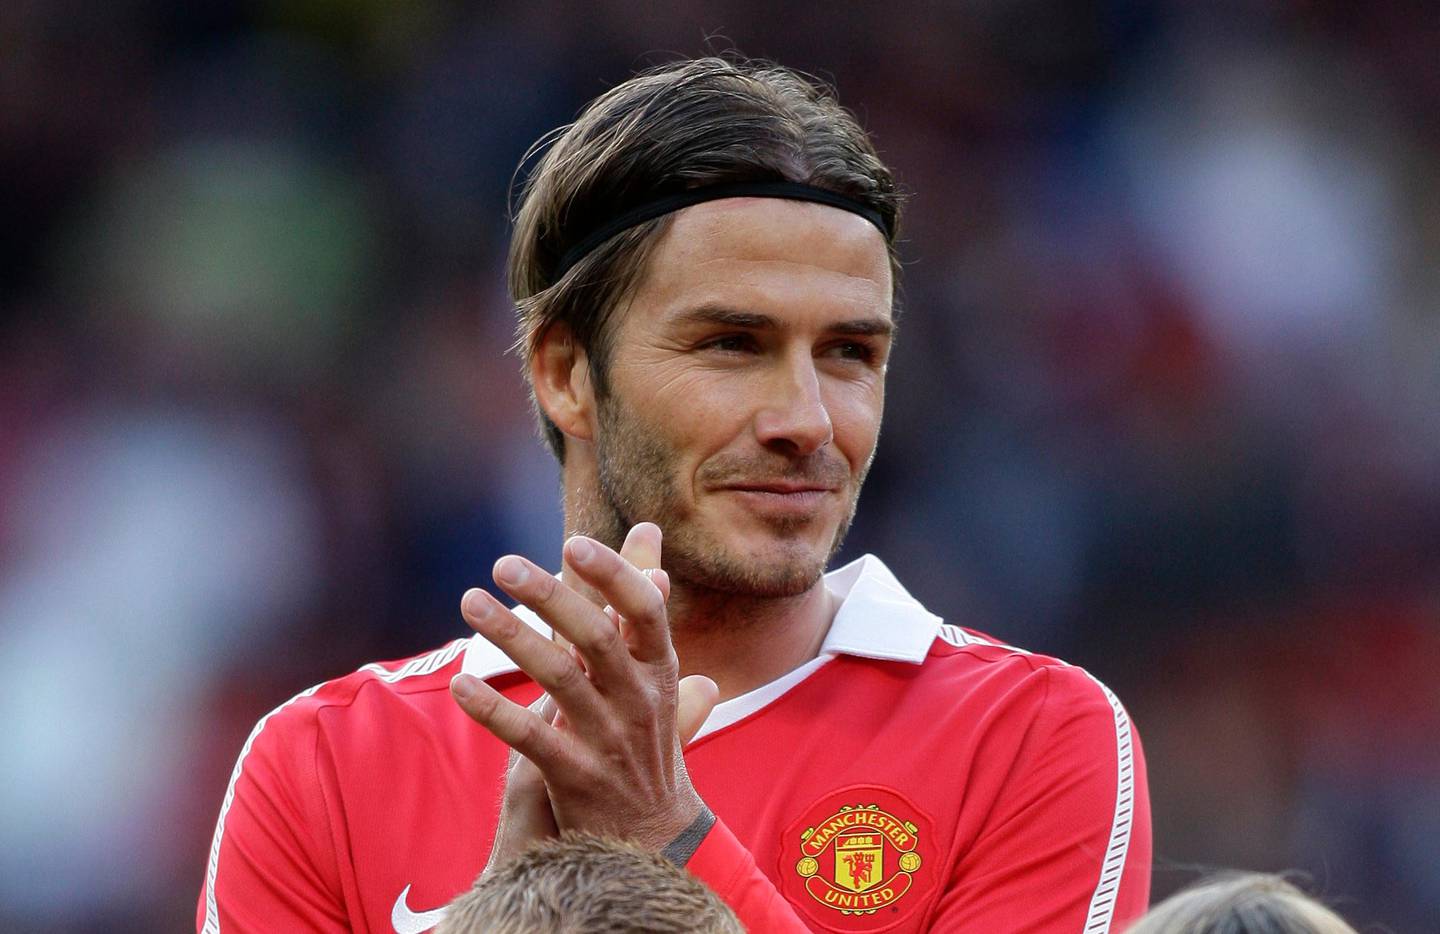 Former Manchester United player David Beckham applauds before his team's friendly soccer match against Juventus at Old Trafford Stadium, Manchester, England, Tuesday May 24, 2011. (AP Photo/Jon Super)   